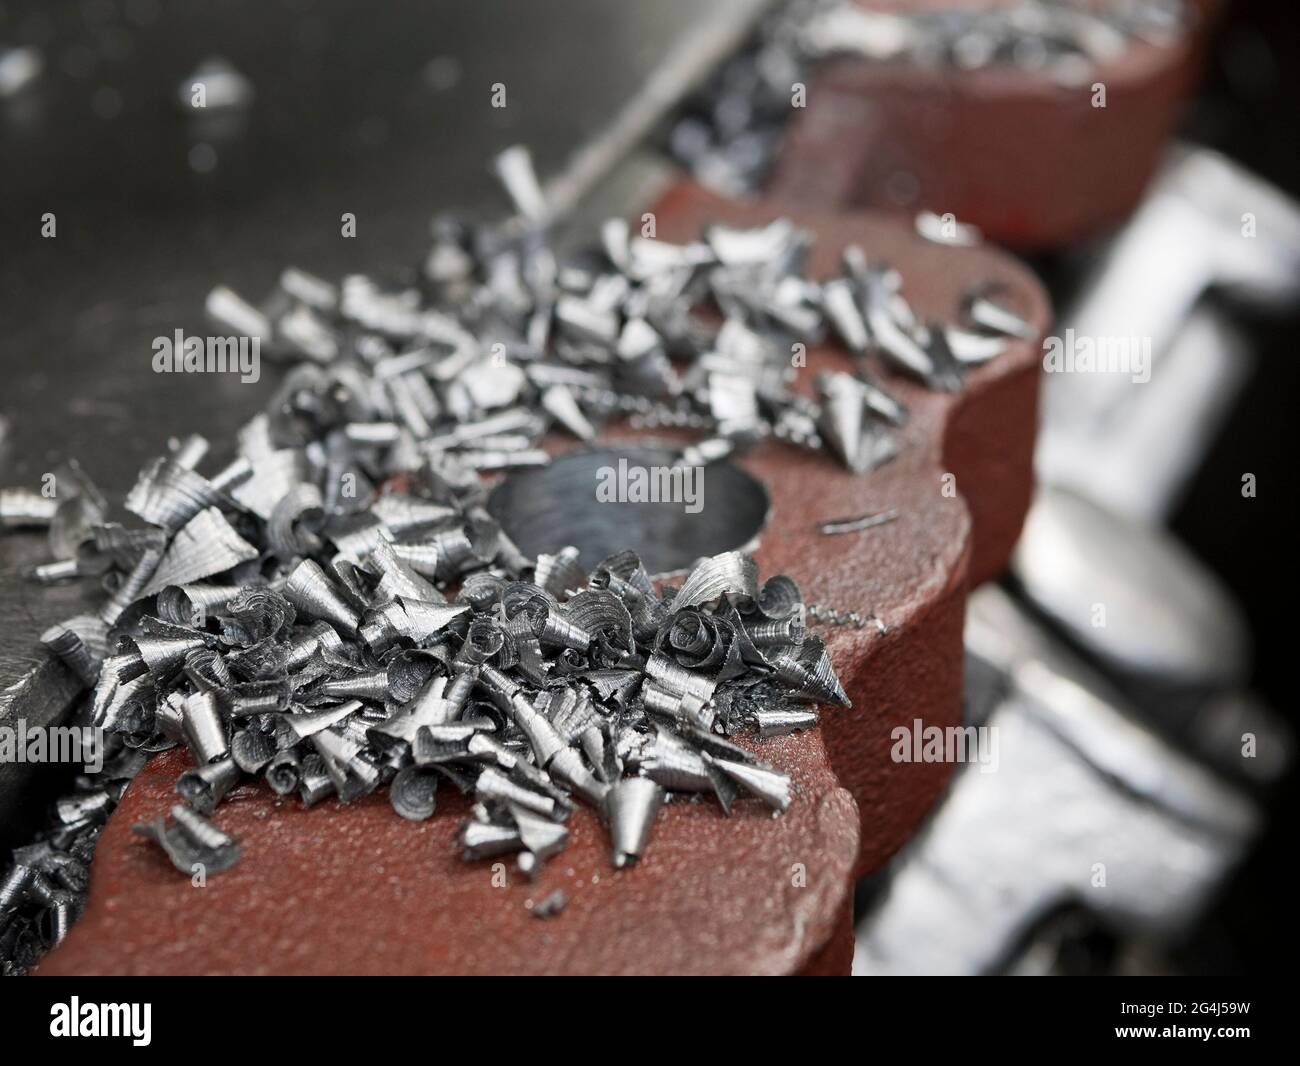 Metal shavings on the surface of lathe, close up. Turned metal particles Stock Photo